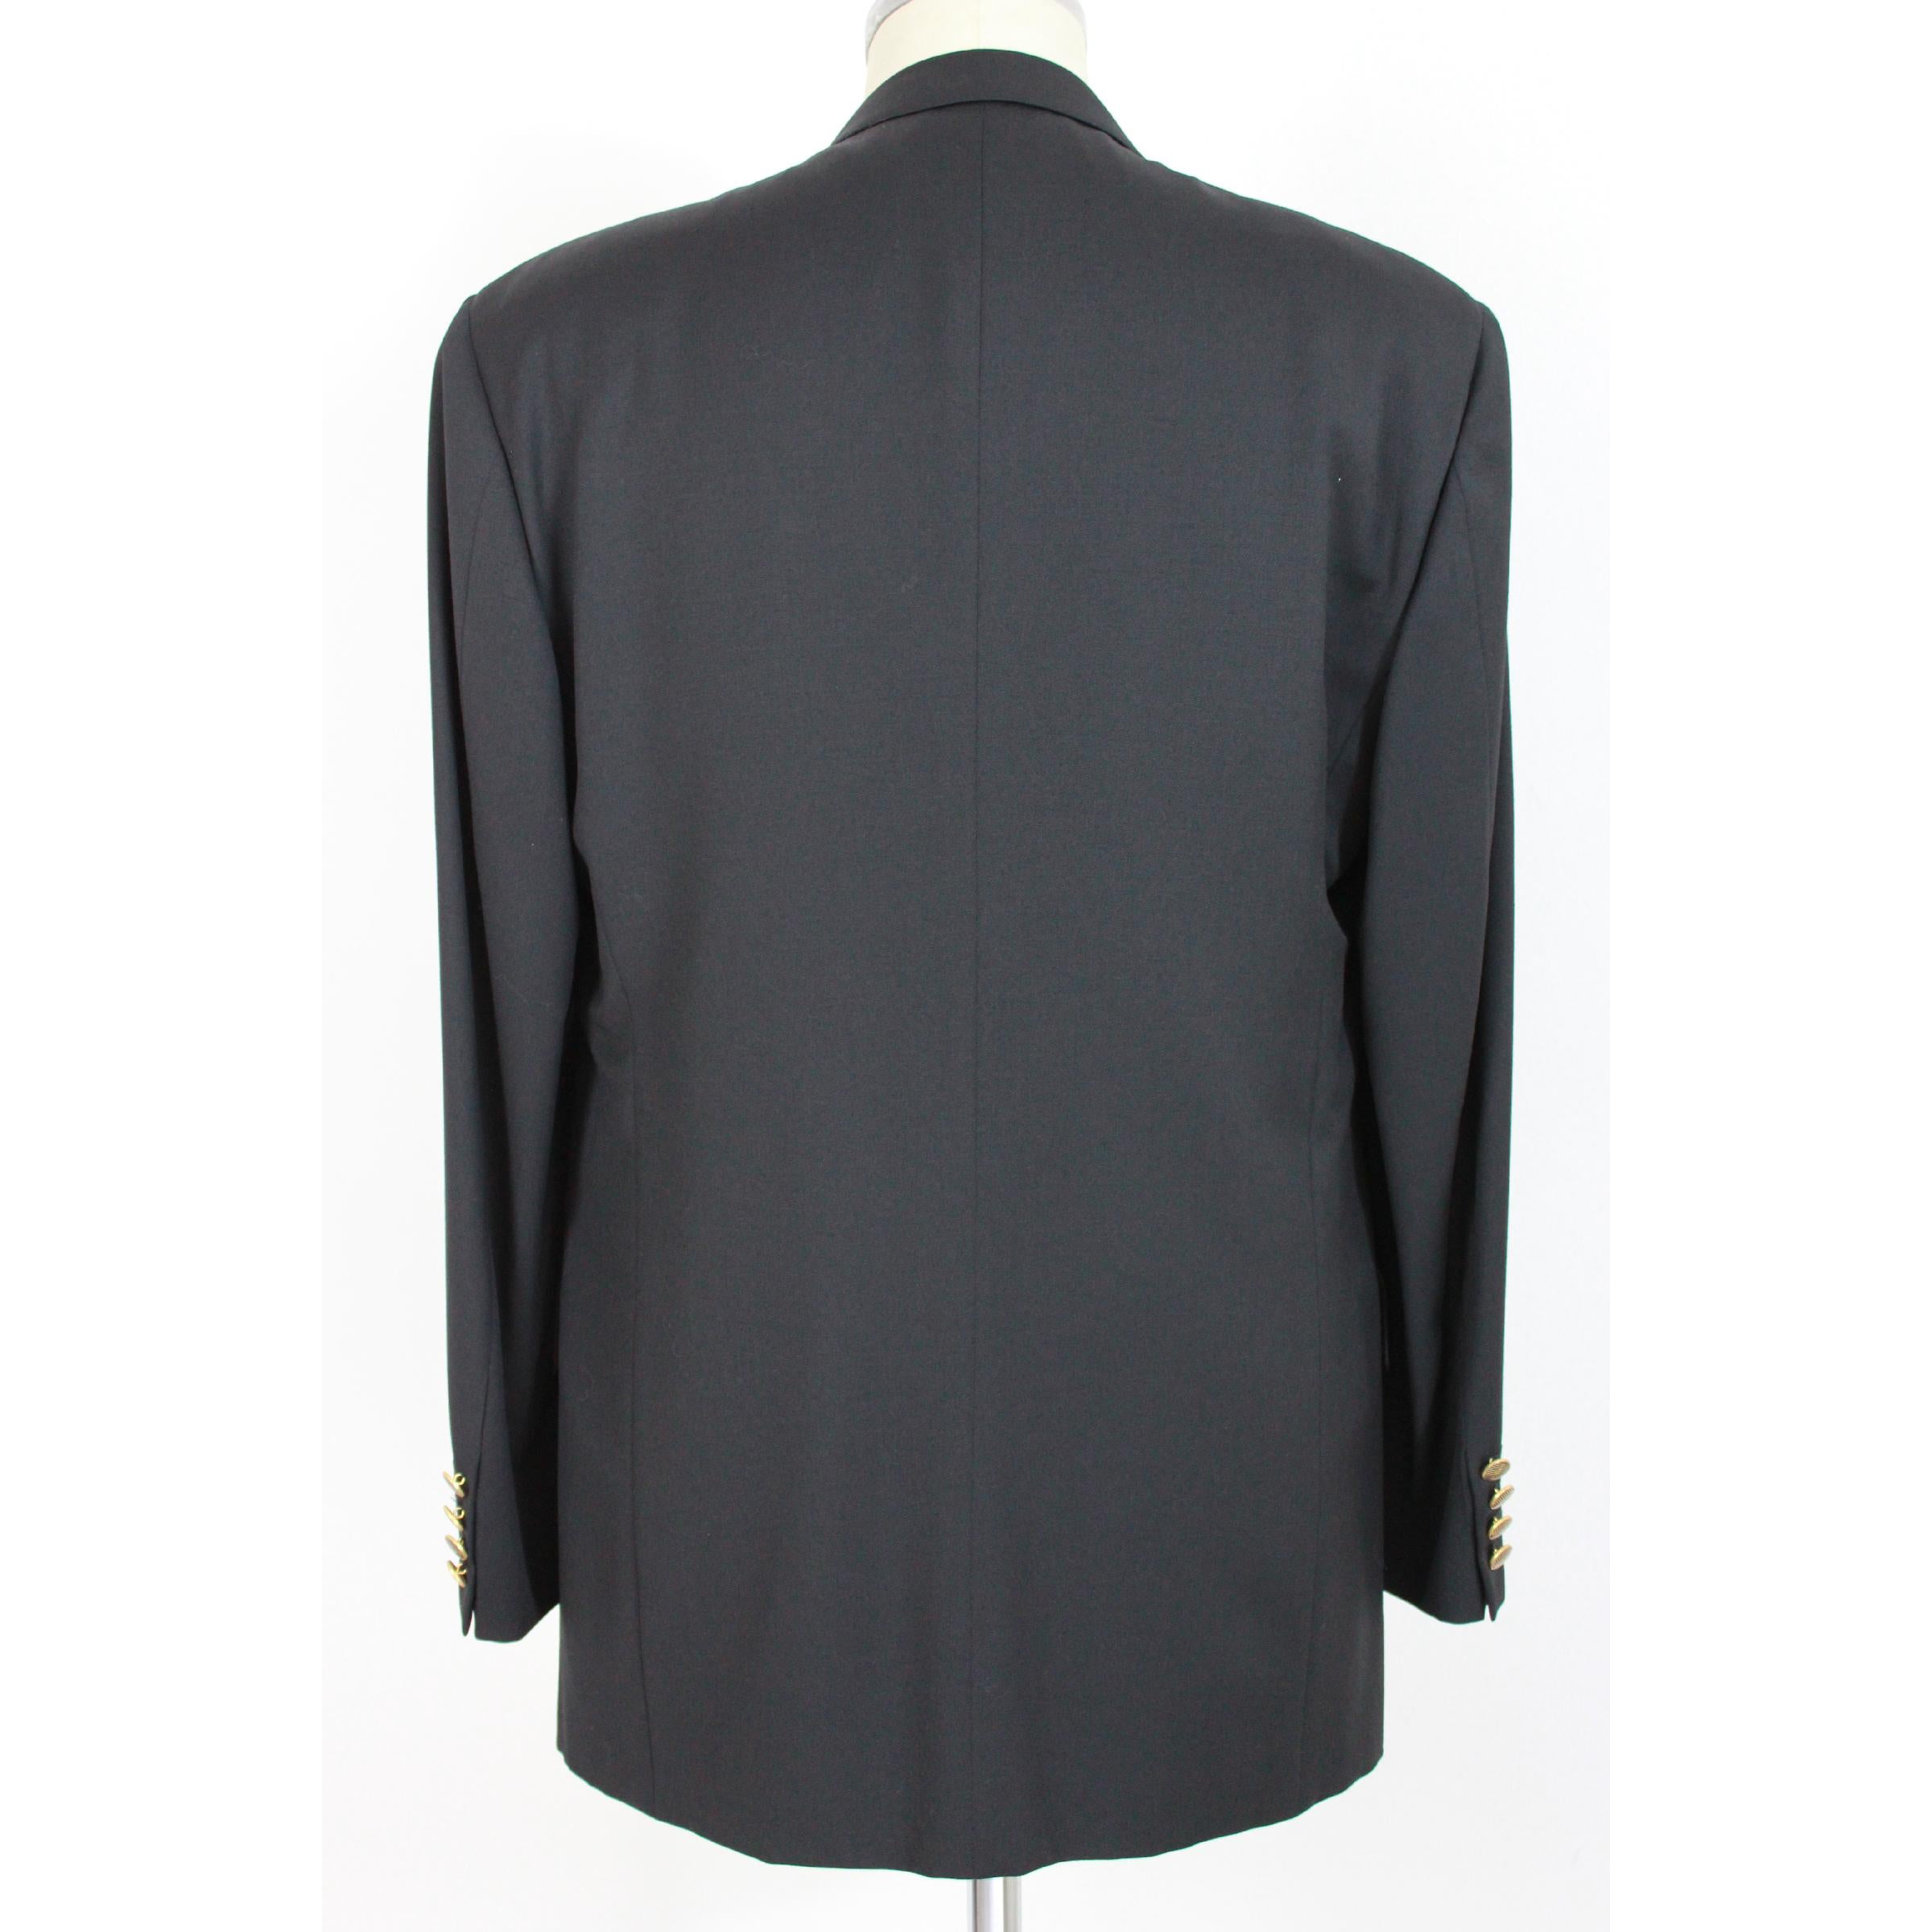 Emanuel Ungaro men's vintage jacket, black, 100% virgin wool. Classic ceremony model, gold-colored buttons, lined inside. 90s. Made in Italy. New with tag.

Size: 50 It 40 Us 40 Uk

Shoulder: 50 cm
Bust / Chest: 57 cm
Sleeve: 63 cm
Length: 85 cm